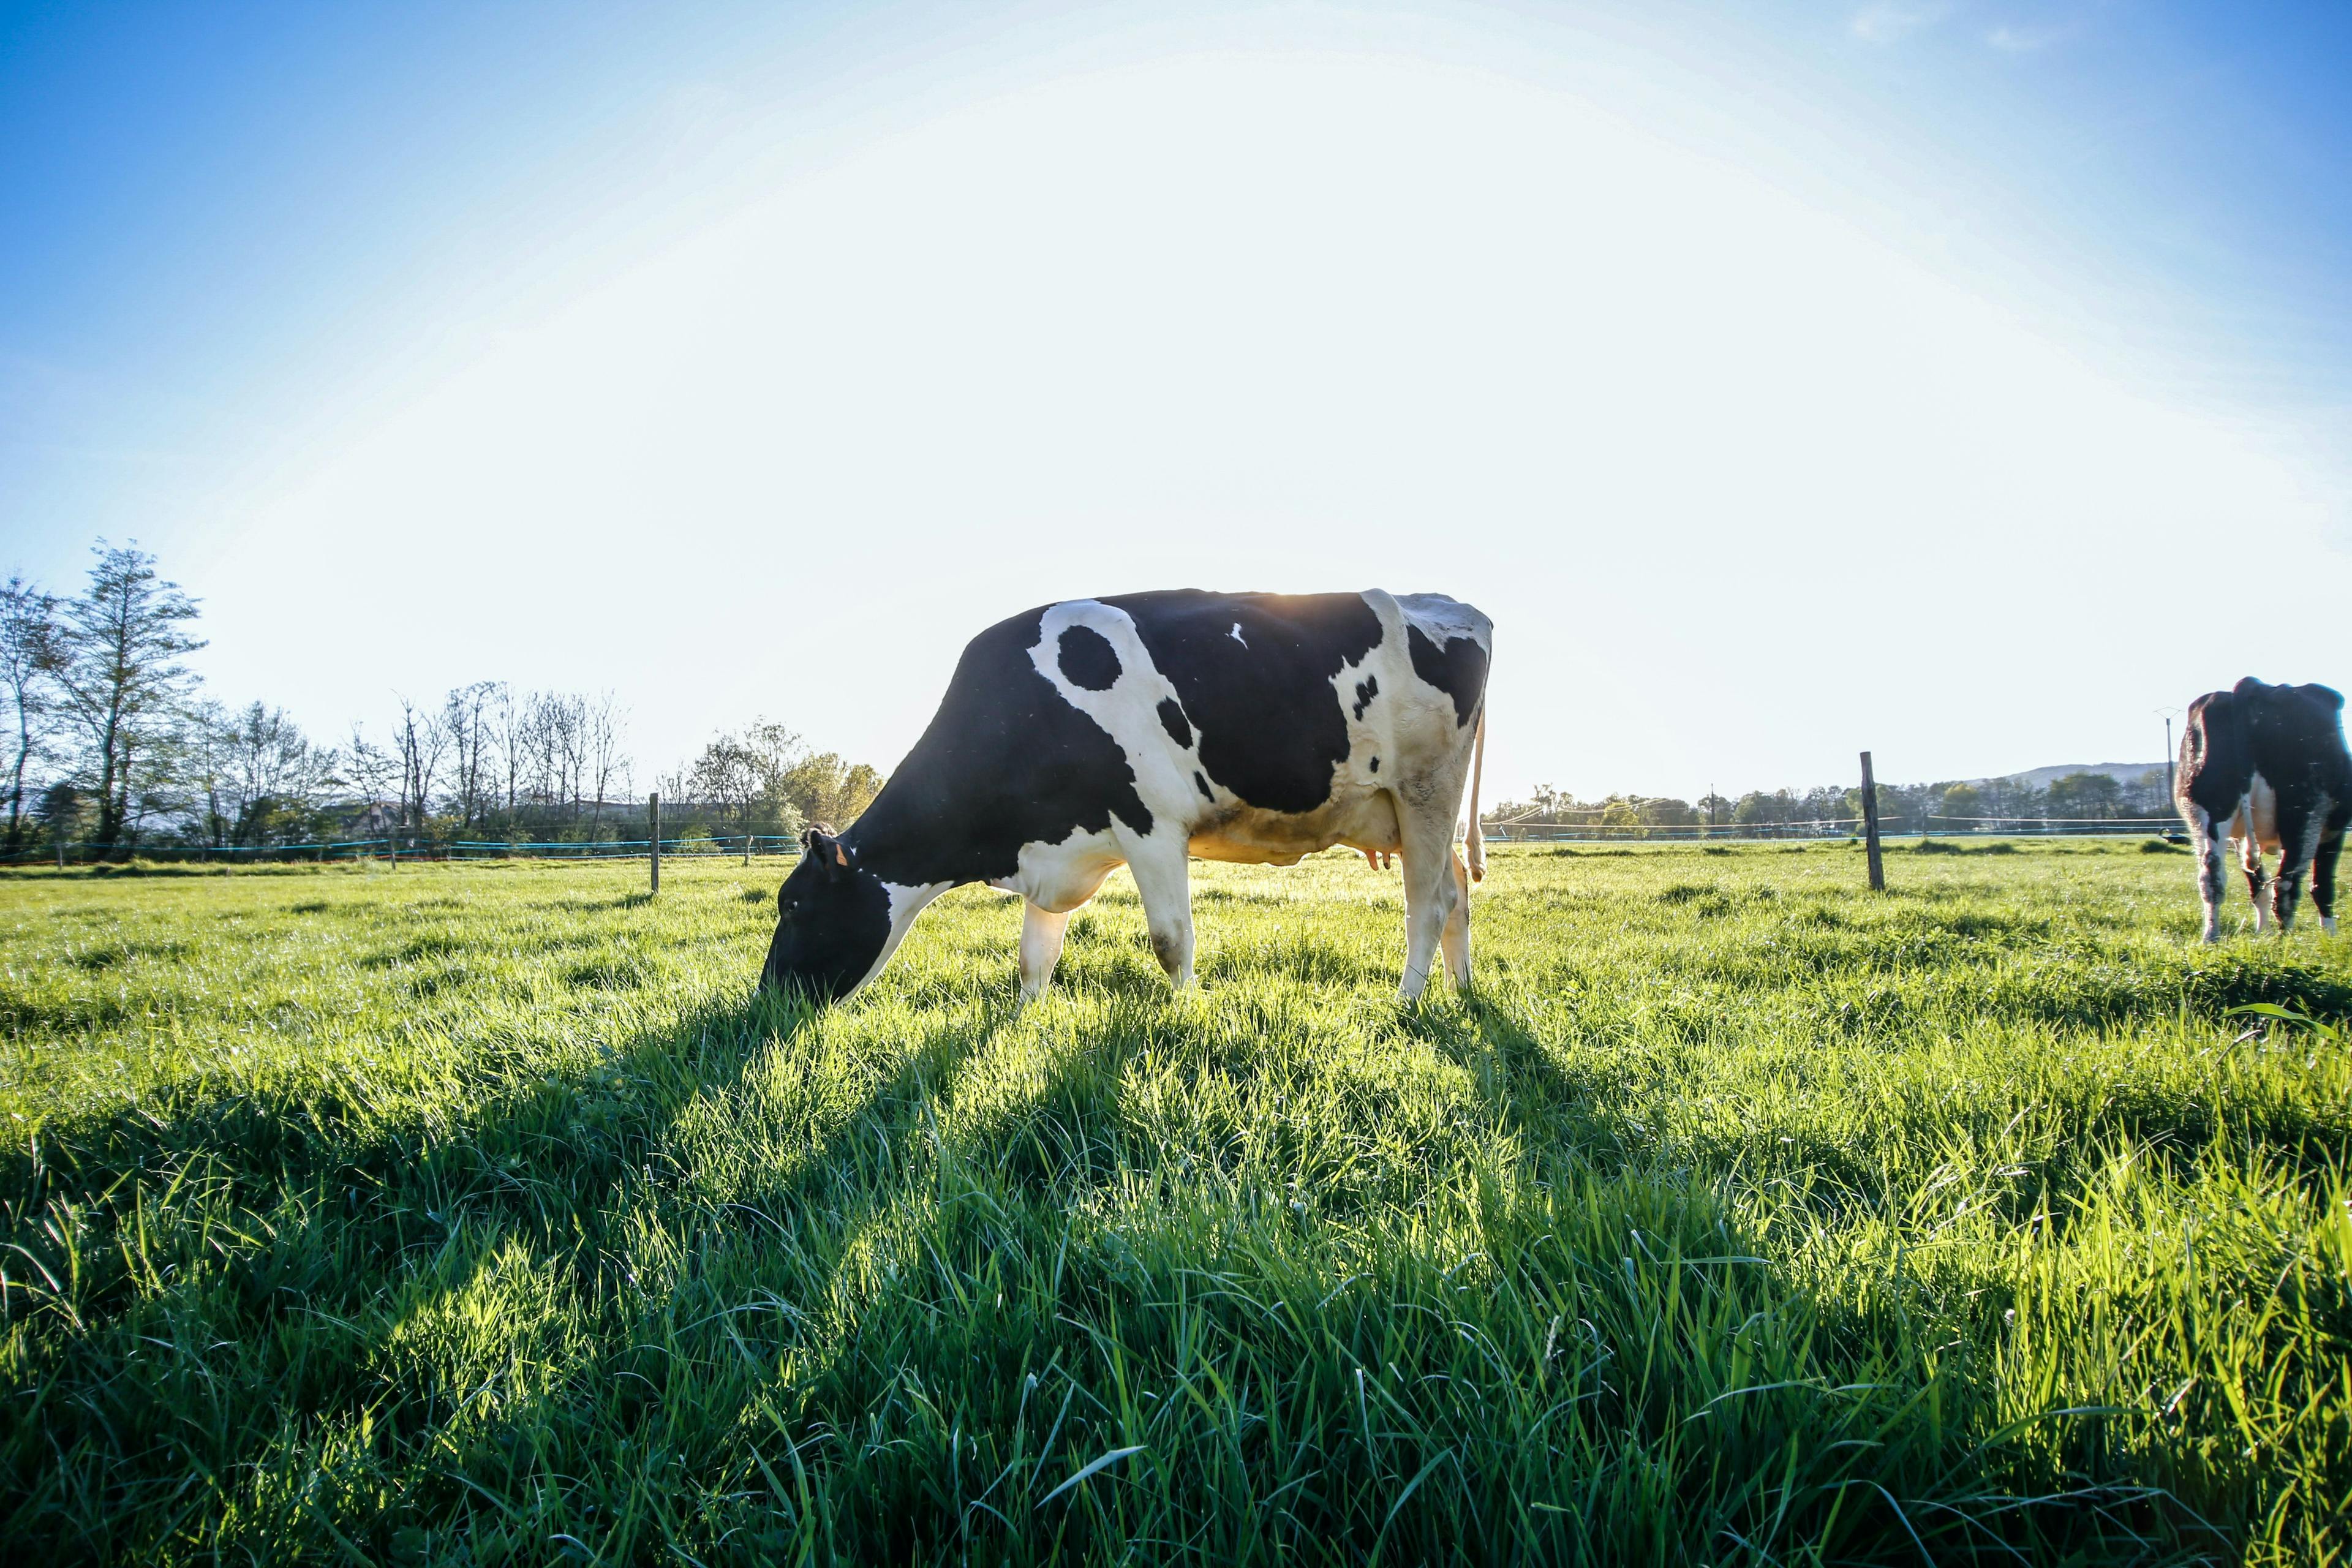 Cow eating grass in a field